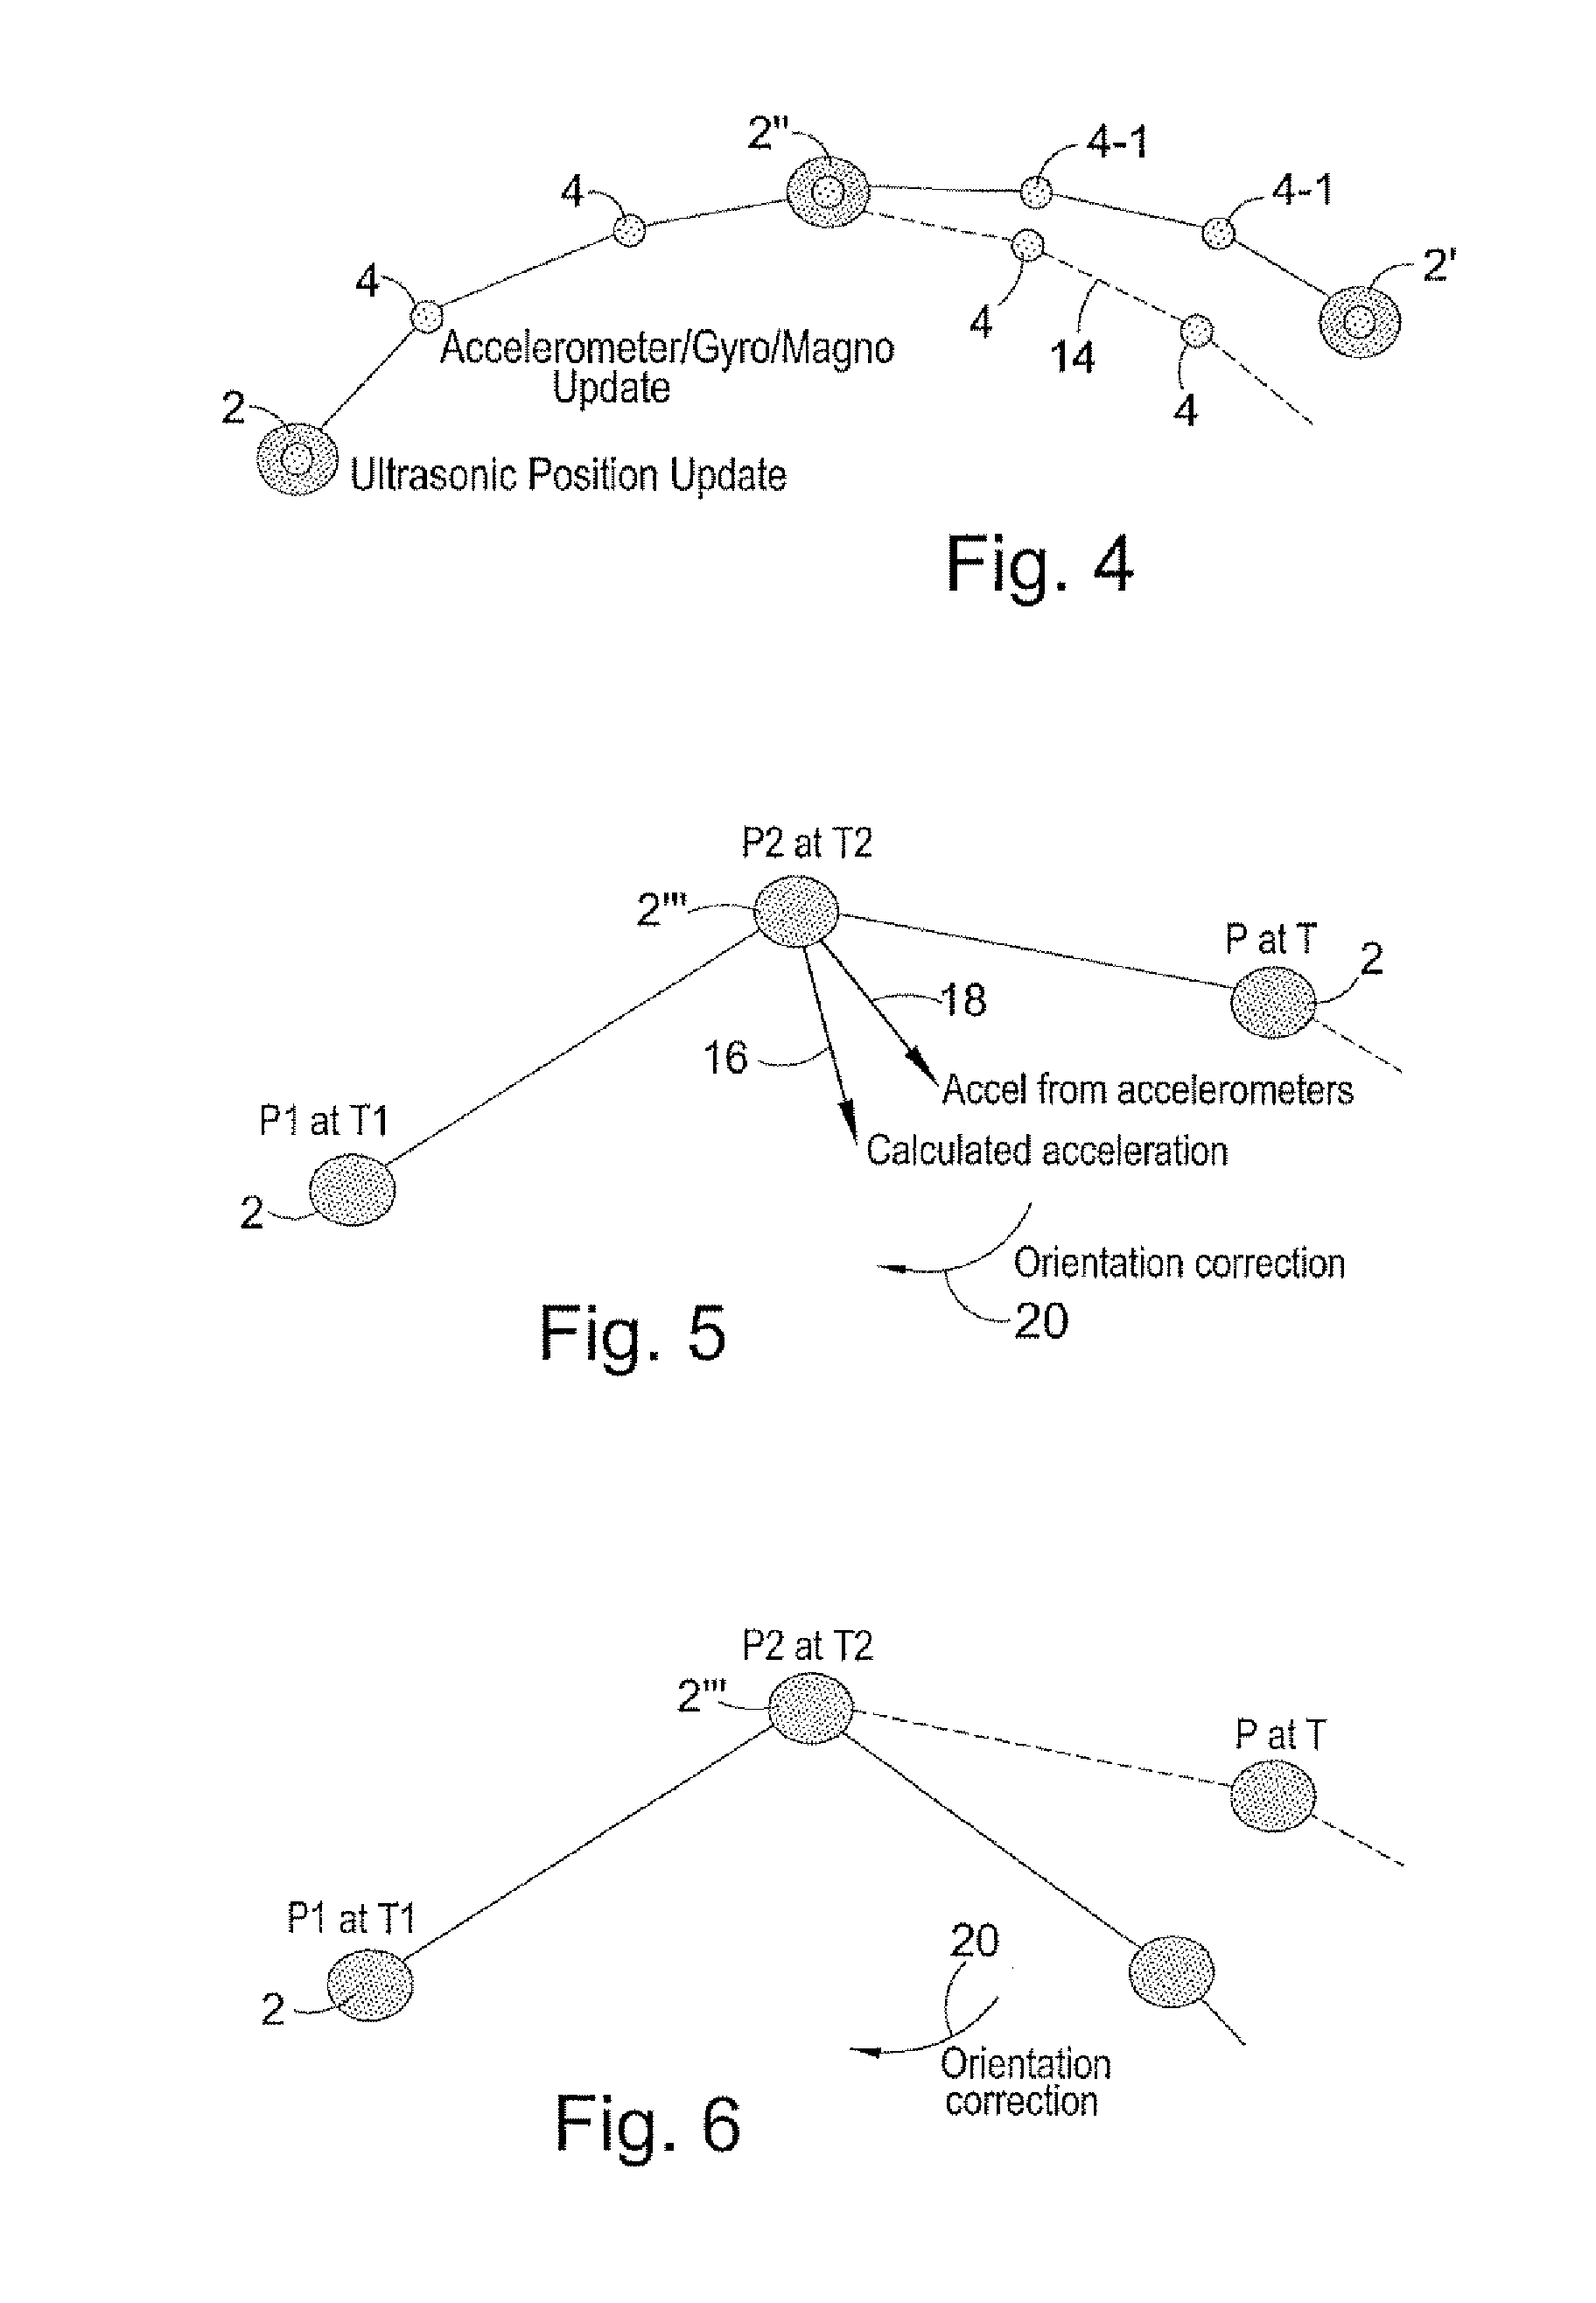 Motion smoothing in 3-d position sensing apparatus